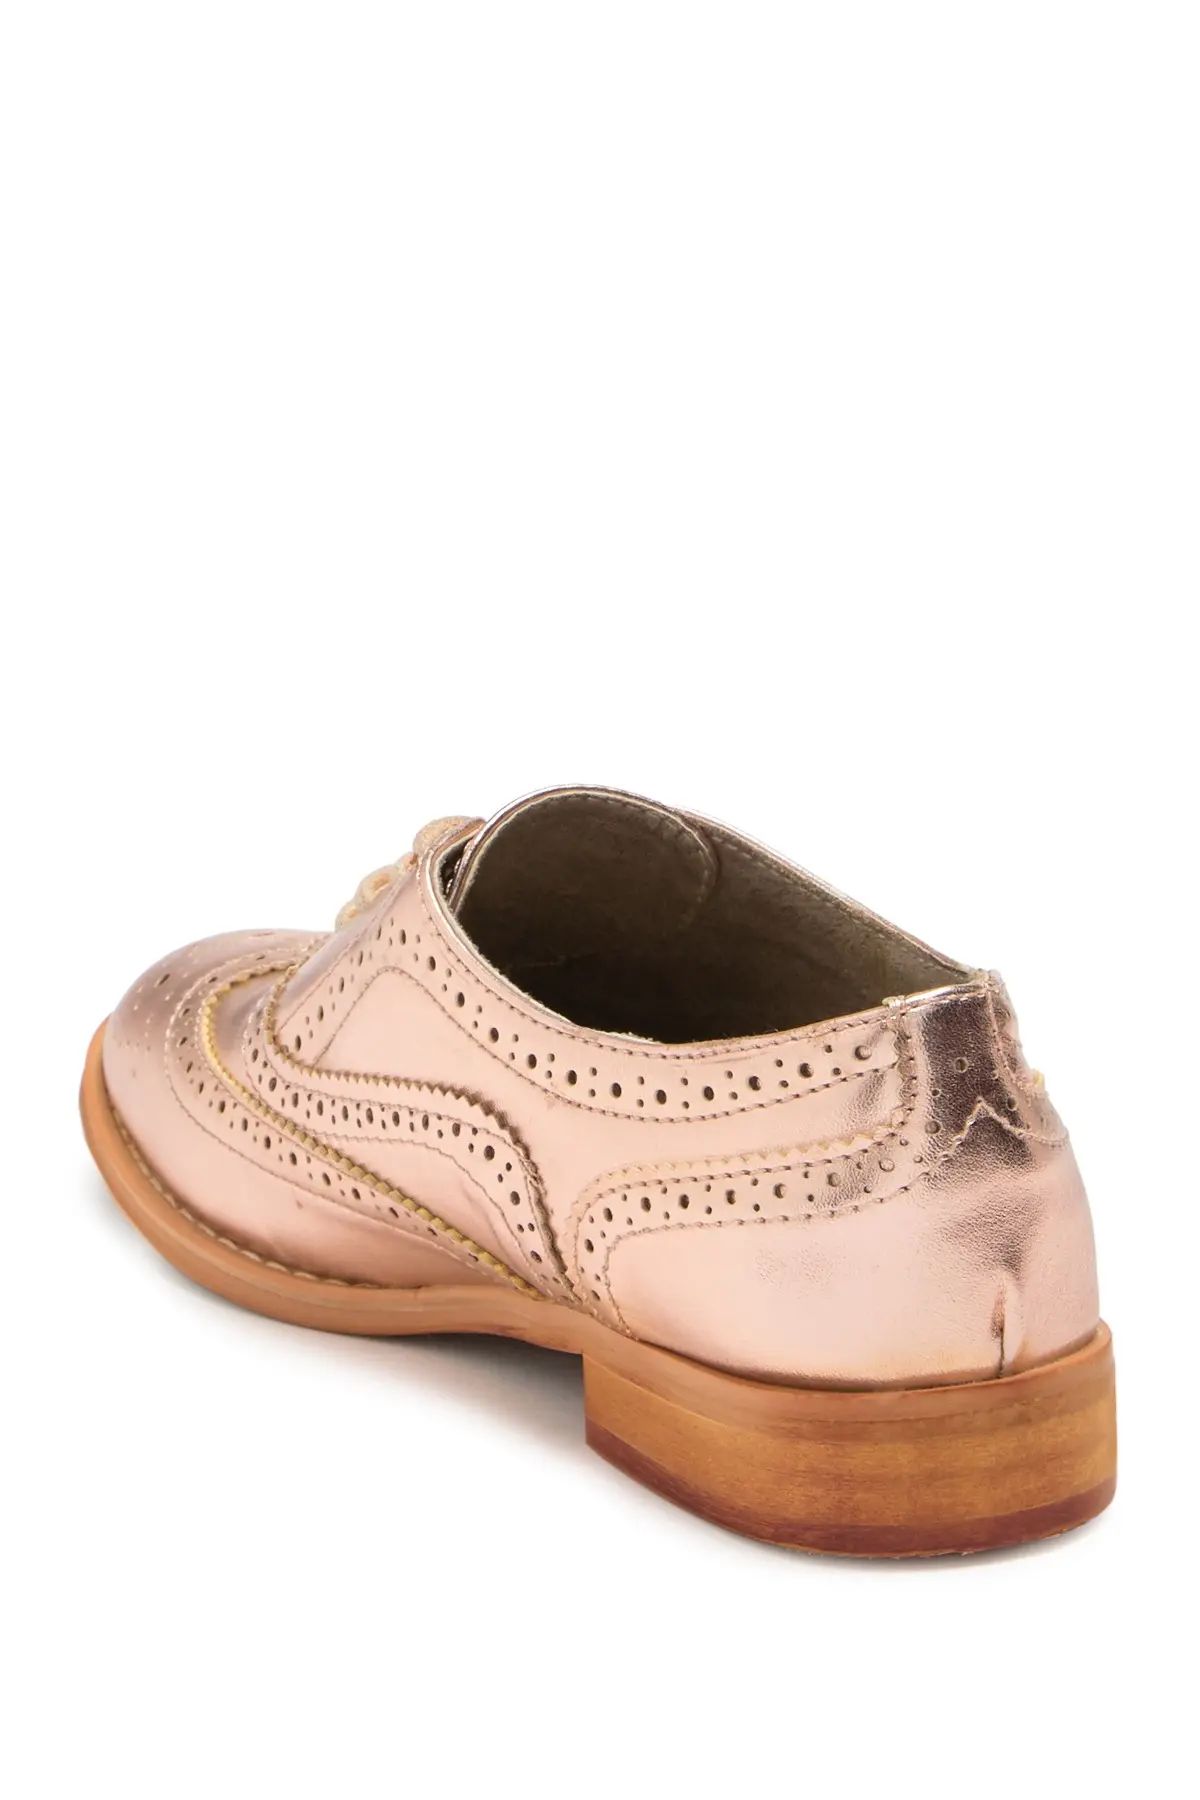 Wanted Babe Wingtip Oxford at Nordstrom Rack | Nordstrom Rack